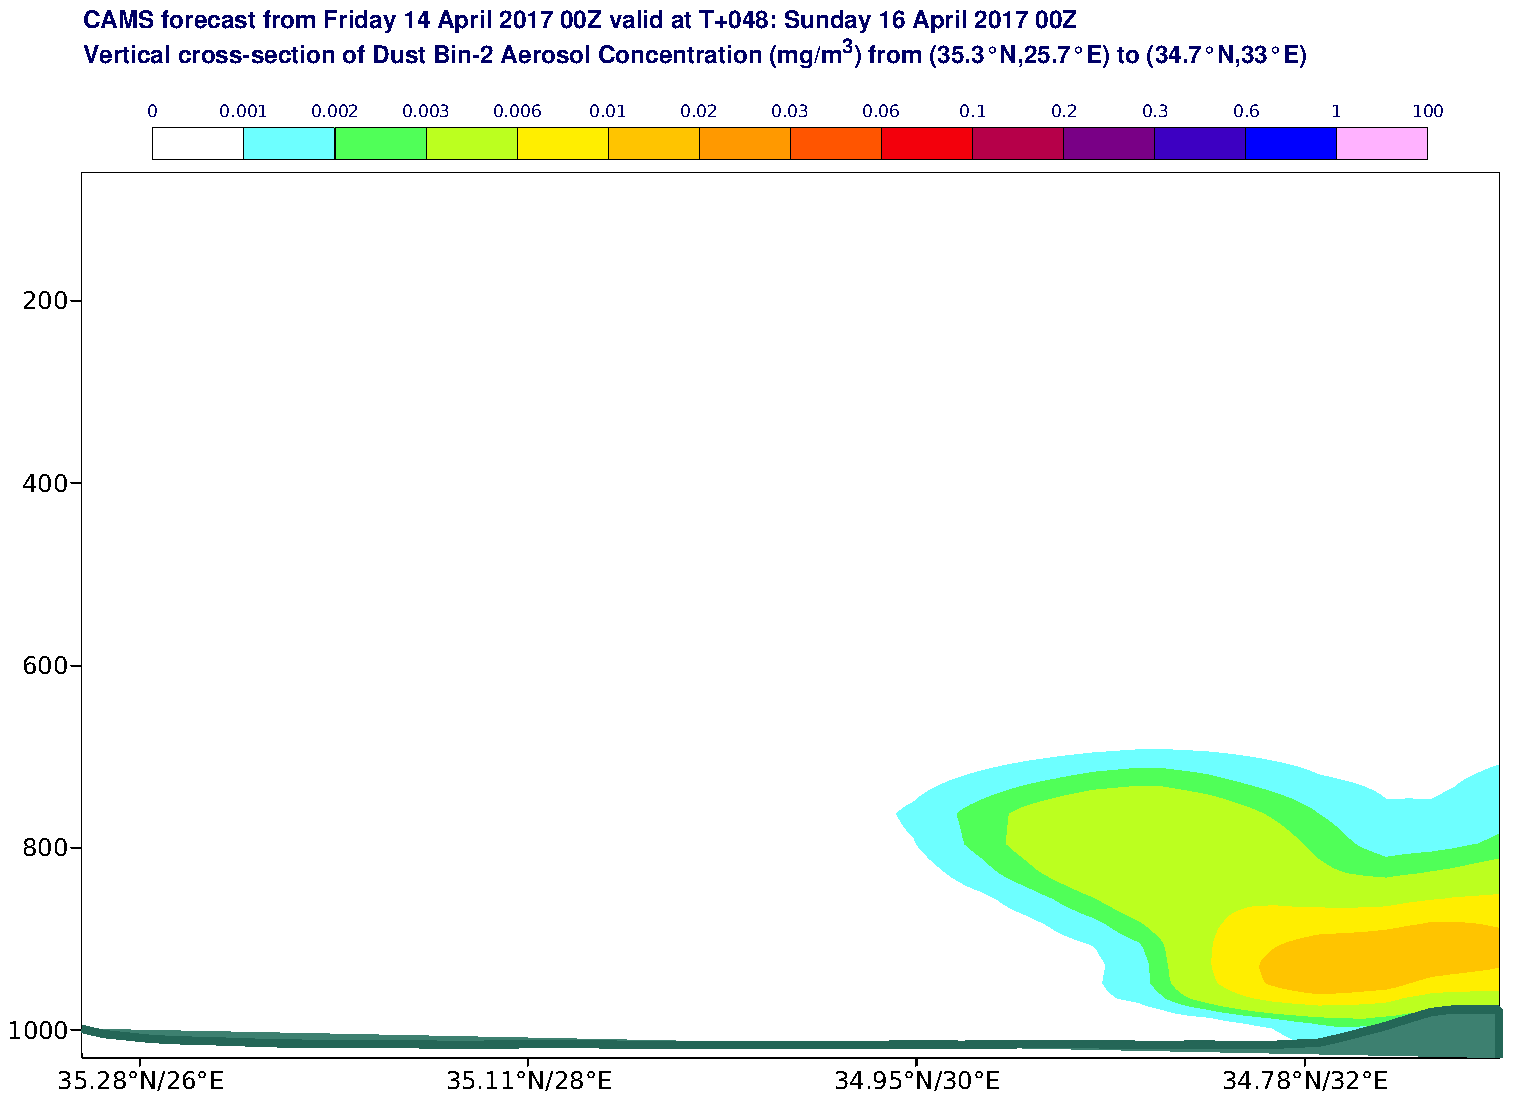 Vertical cross-section of Dust Bin-2 Aerosol Concentration (mg/m3) valid at T48 - 2017-04-16 00:00